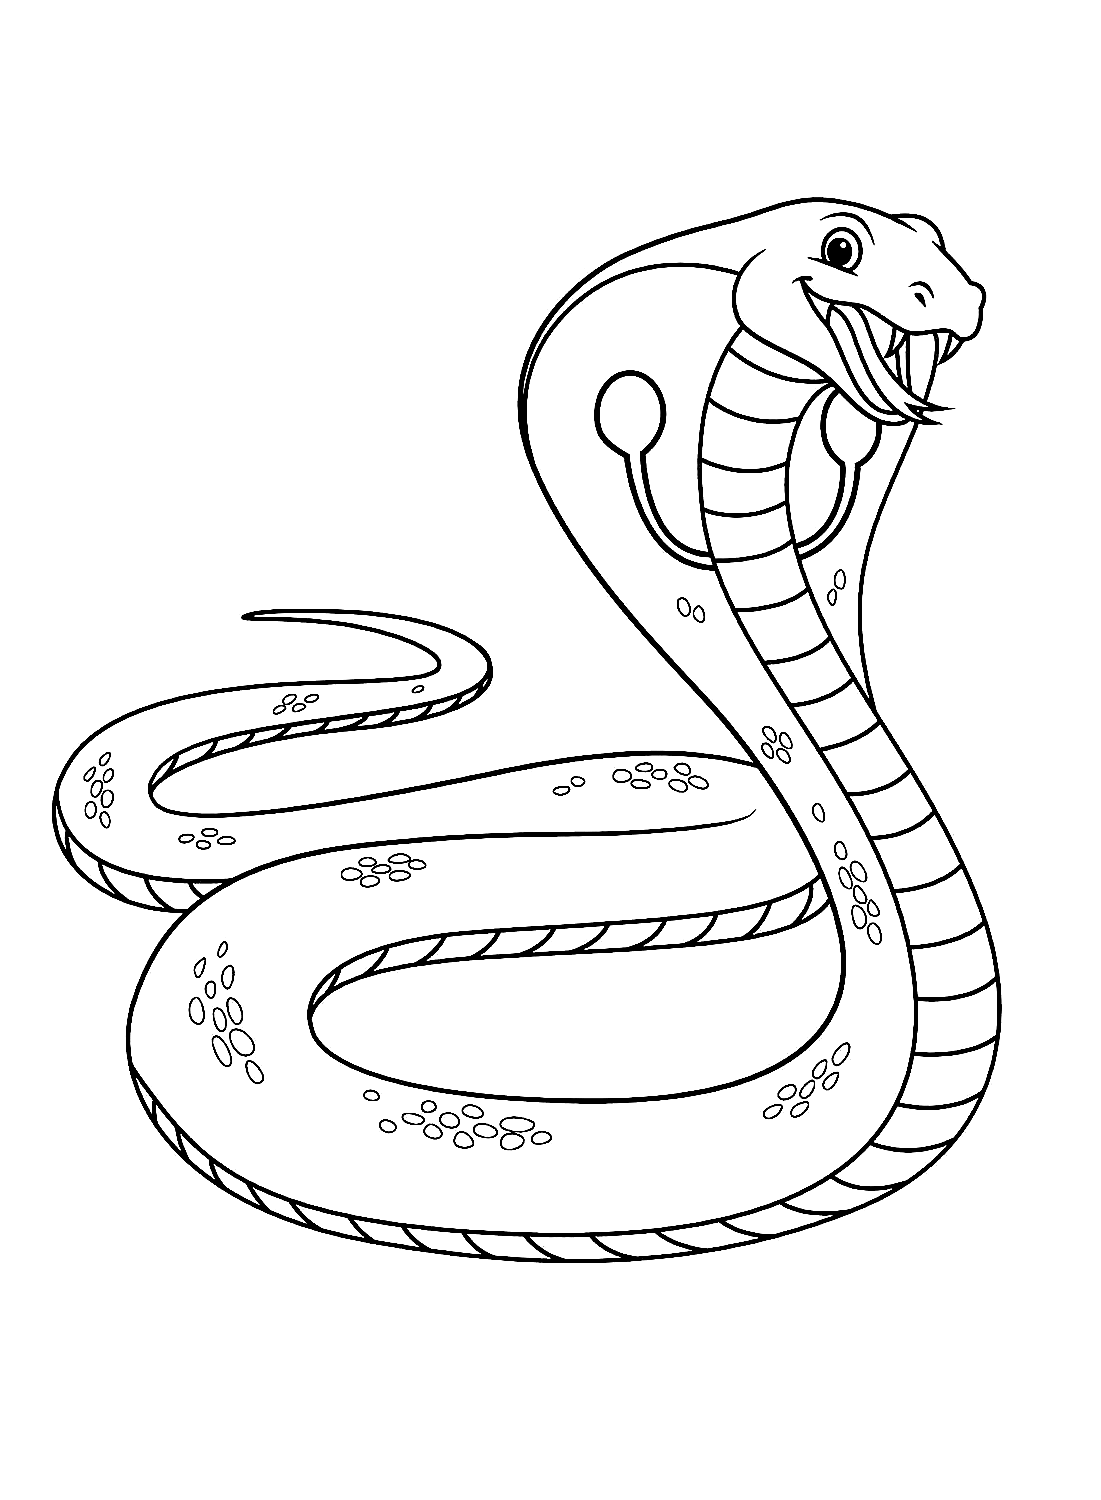 Snake picture to color